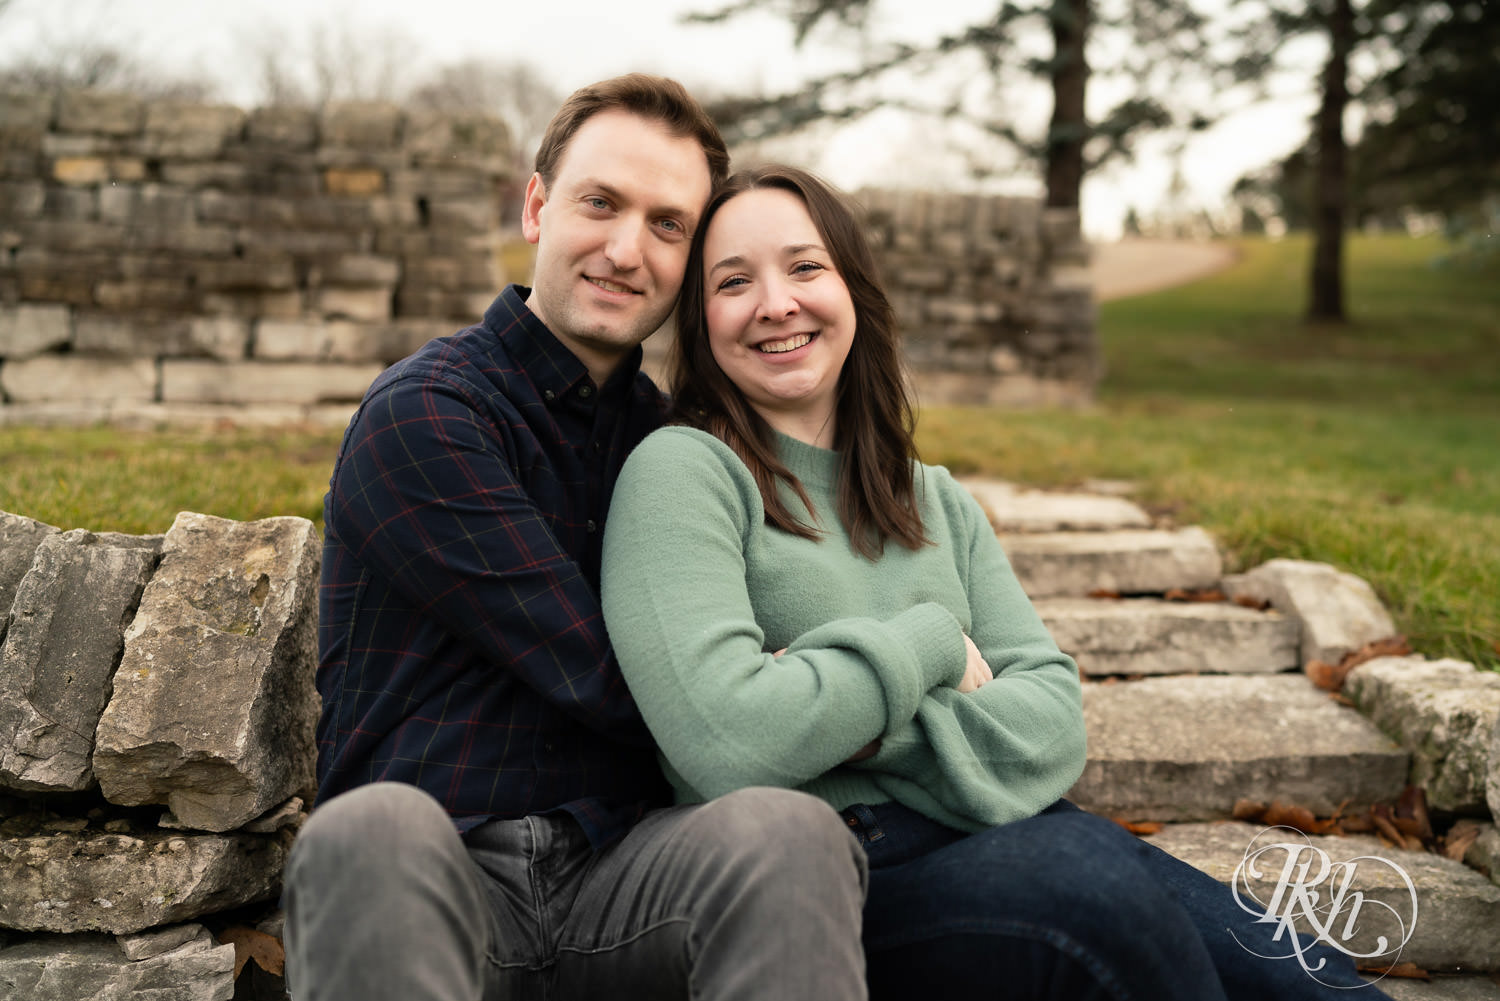 Man and woman smile during winter engagement photography at Minnesota Landscape Arboretum in Chaska, Minnesota.